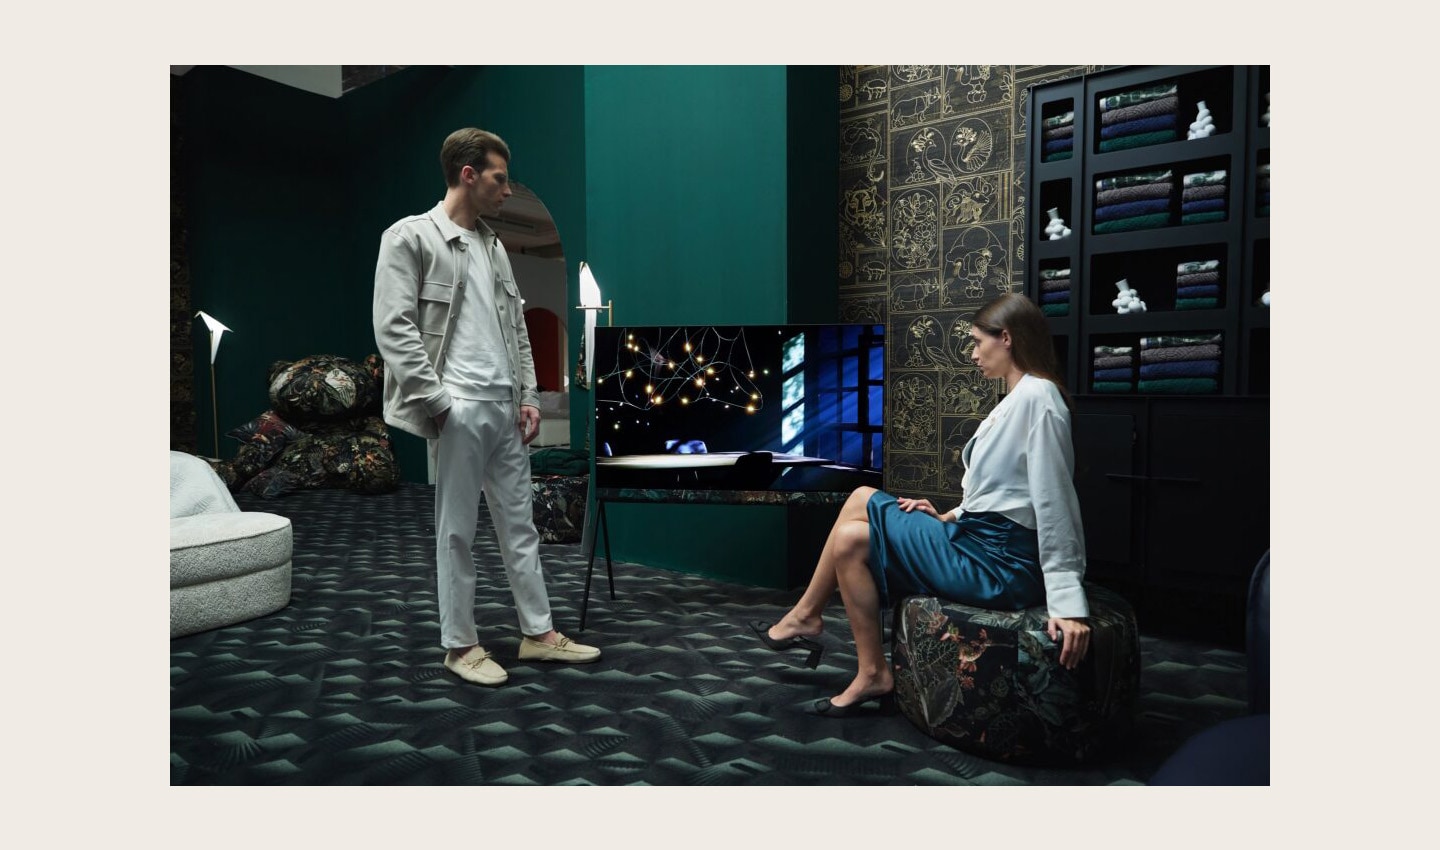 A man and woman admire the LG OLED Objet Collection Posé model in the center of a green-themed space designed by Dutch brand Moooi